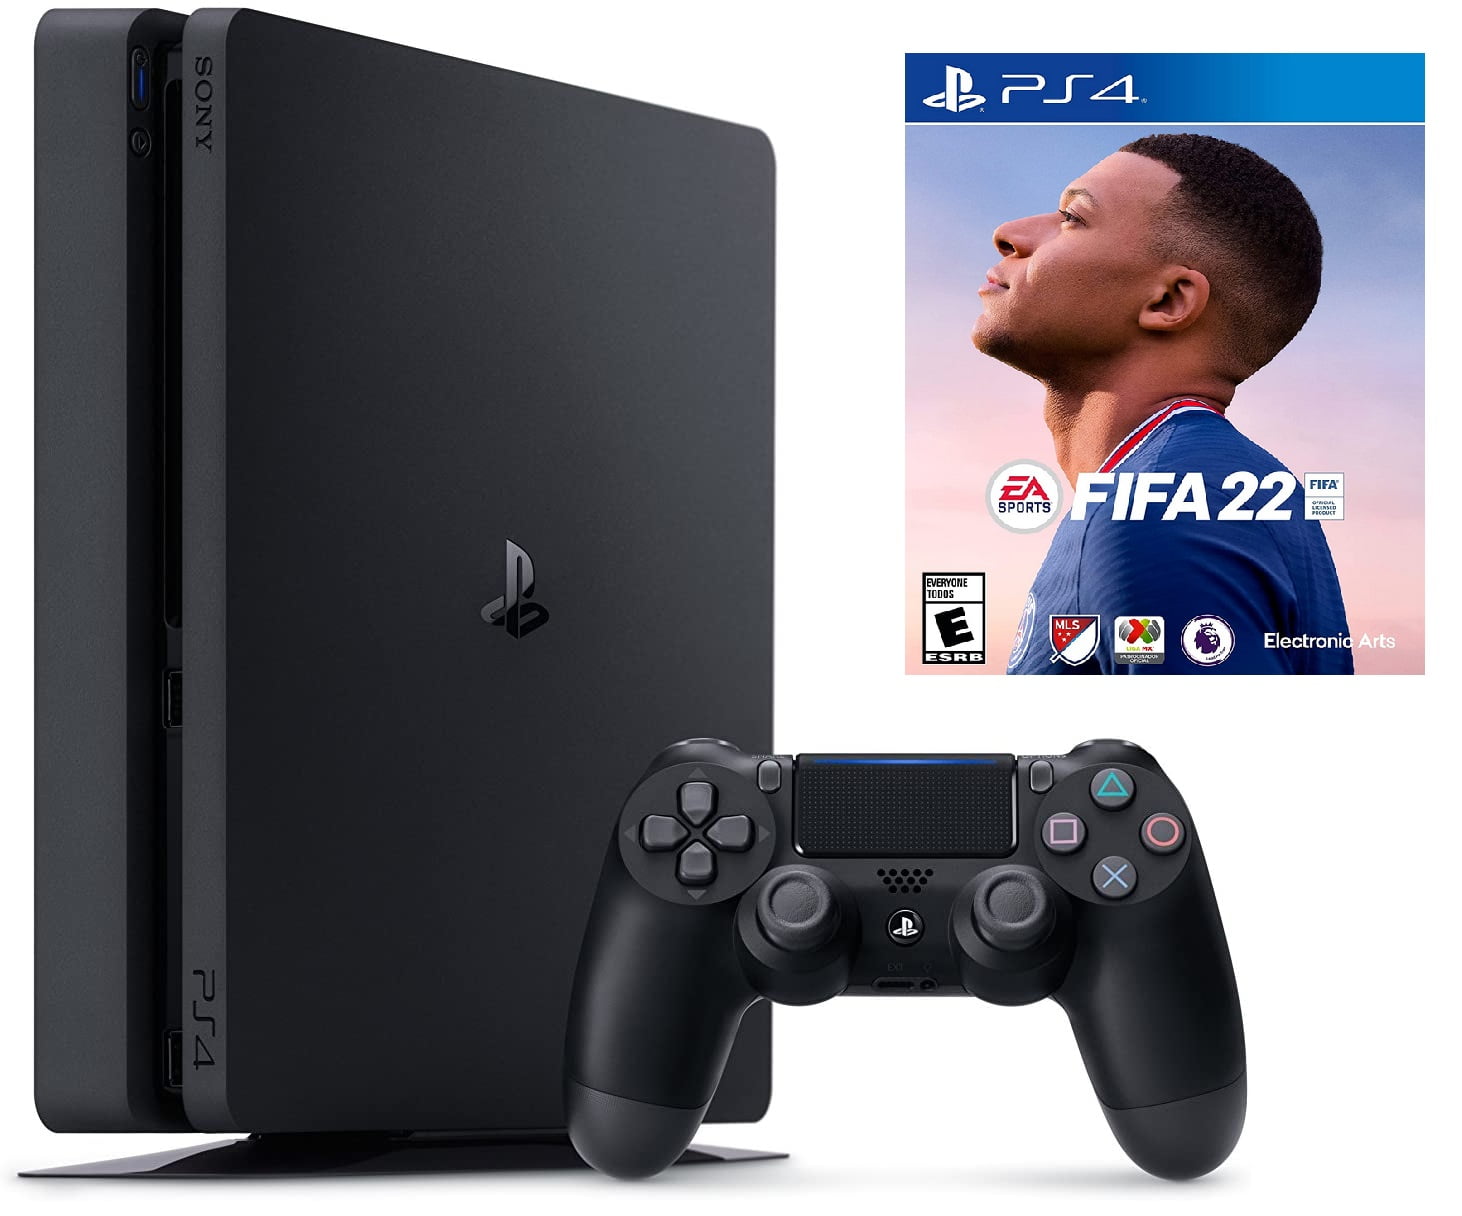 Boring Masculinity toothache TEC Sony PlayStation 4 1TB Slim Gaming Console Bundle with FIFA 22 Game -  Walmart.com